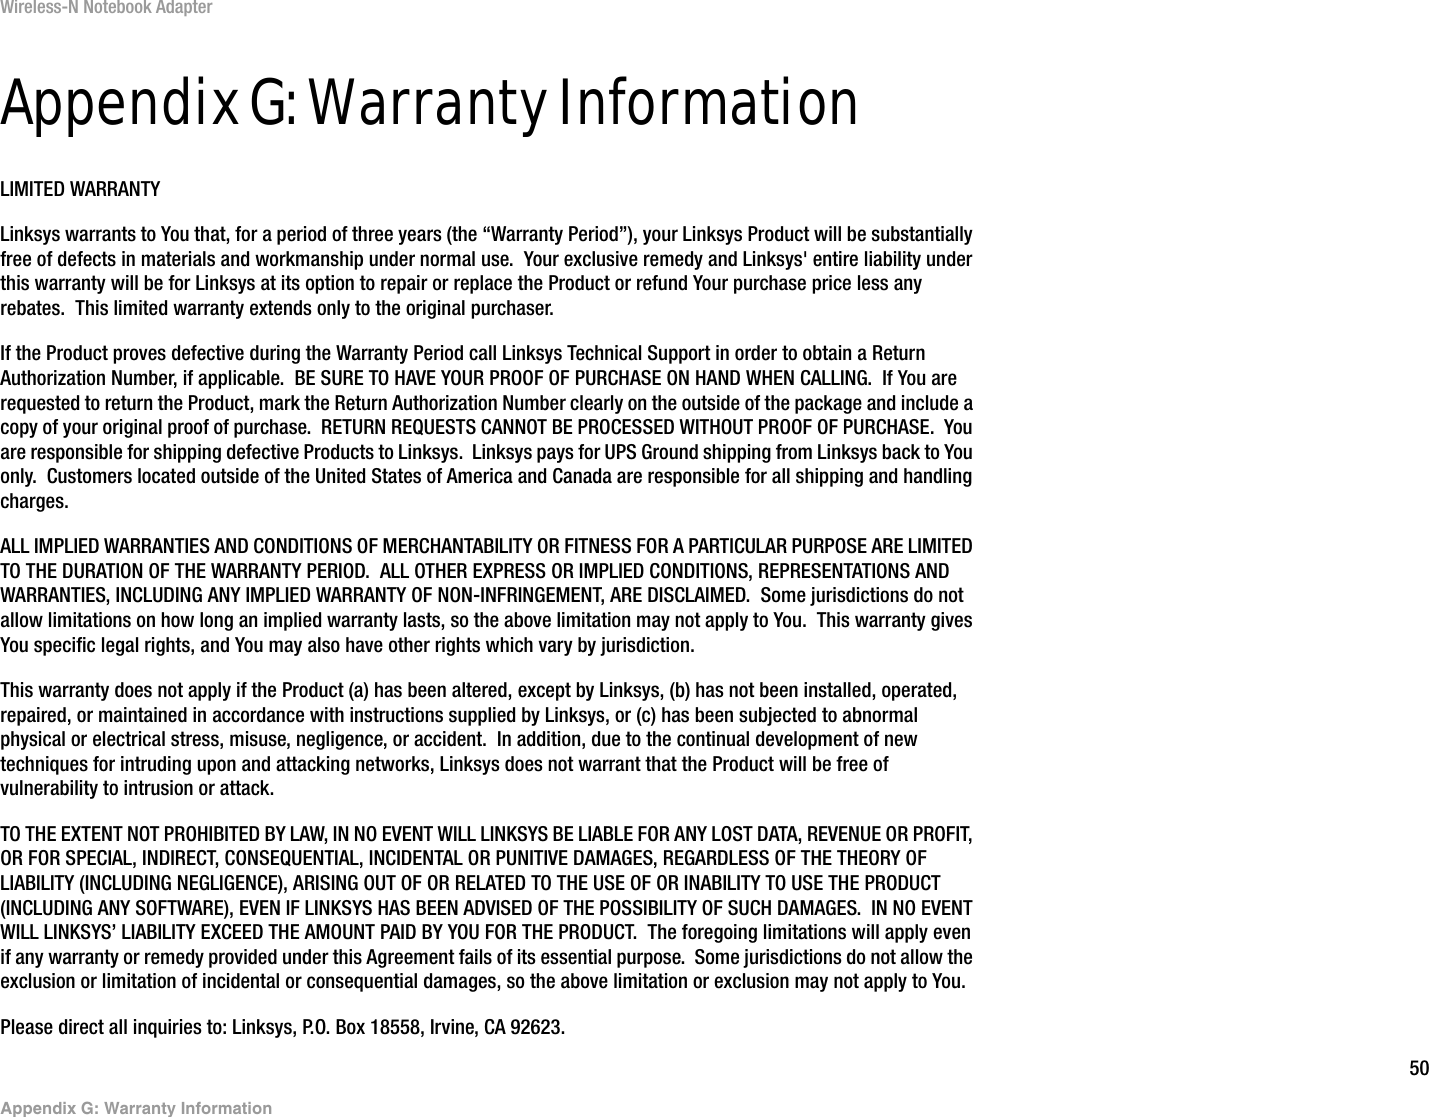 50Appendix G: Warranty InformationWireless-N Notebook AdapterAppendix G: Warranty InformationLIMITED WARRANTYLinksys warrants to You that, for a period of three years (the “Warranty Period”), your Linksys Product will be substantially free of defects in materials and workmanship under normal use.  Your exclusive remedy and Linksys&apos; entire liability under this warranty will be for Linksys at its option to repair or replace the Product or refund Your purchase price less any rebates.  This limited warranty extends only to the original purchaser.  If the Product proves defective during the Warranty Period call Linksys Technical Support in order to obtain a Return Authorization Number, if applicable.  BE SURE TO HAVE YOUR PROOF OF PURCHASE ON HAND WHEN CALLING.  If You are requested to return the Product, mark the Return Authorization Number clearly on the outside of the package and include a copy of your original proof of purchase.  RETURN REQUESTS CANNOT BE PROCESSED WITHOUT PROOF OF PURCHASE.  You are responsible for shipping defective Products to Linksys.  Linksys pays for UPS Ground shipping from Linksys back to You only.  Customers located outside of the United States of America and Canada are responsible for all shipping and handling charges. ALL IMPLIED WARRANTIES AND CONDITIONS OF MERCHANTABILITY OR FITNESS FOR A PARTICULAR PURPOSE ARE LIMITED TO THE DURATION OF THE WARRANTY PERIOD.  ALL OTHER EXPRESS OR IMPLIED CONDITIONS, REPRESENTATIONS AND WARRANTIES, INCLUDING ANY IMPLIED WARRANTY OF NON-INFRINGEMENT, ARE DISCLAIMED.  Some jurisdictions do not allow limitations on how long an implied warranty lasts, so the above limitation may not apply to You.  This warranty gives You specific legal rights, and You may also have other rights which vary by jurisdiction.This warranty does not apply if the Product (a) has been altered, except by Linksys, (b) has not been installed, operated, repaired, or maintained in accordance with instructions supplied by Linksys, or (c) has been subjected to abnormal physical or electrical stress, misuse, negligence, or accident.  In addition, due to the continual development of new techniques for intruding upon and attacking networks, Linksys does not warrant that the Product will be free of vulnerability to intrusion or attack.TO THE EXTENT NOT PROHIBITED BY LAW, IN NO EVENT WILL LINKSYS BE LIABLE FOR ANY LOST DATA, REVENUE OR PROFIT, OR FOR SPECIAL, INDIRECT, CONSEQUENTIAL, INCIDENTAL OR PUNITIVE DAMAGES, REGARDLESS OF THE THEORY OF LIABILITY (INCLUDING NEGLIGENCE), ARISING OUT OF OR RELATED TO THE USE OF OR INABILITY TO USE THE PRODUCT (INCLUDING ANY SOFTWARE), EVEN IF LINKSYS HAS BEEN ADVISED OF THE POSSIBILITY OF SUCH DAMAGES.  IN NO EVENT WILL LINKSYS’ LIABILITY EXCEED THE AMOUNT PAID BY YOU FOR THE PRODUCT.  The foregoing limitations will apply even if any warranty or remedy provided under this Agreement fails of its essential purpose.  Some jurisdictions do not allow the exclusion or limitation of incidental or consequential damages, so the above limitation or exclusion may not apply to You.Please direct all inquiries to: Linksys, P.O. Box 18558, Irvine, CA 92623.